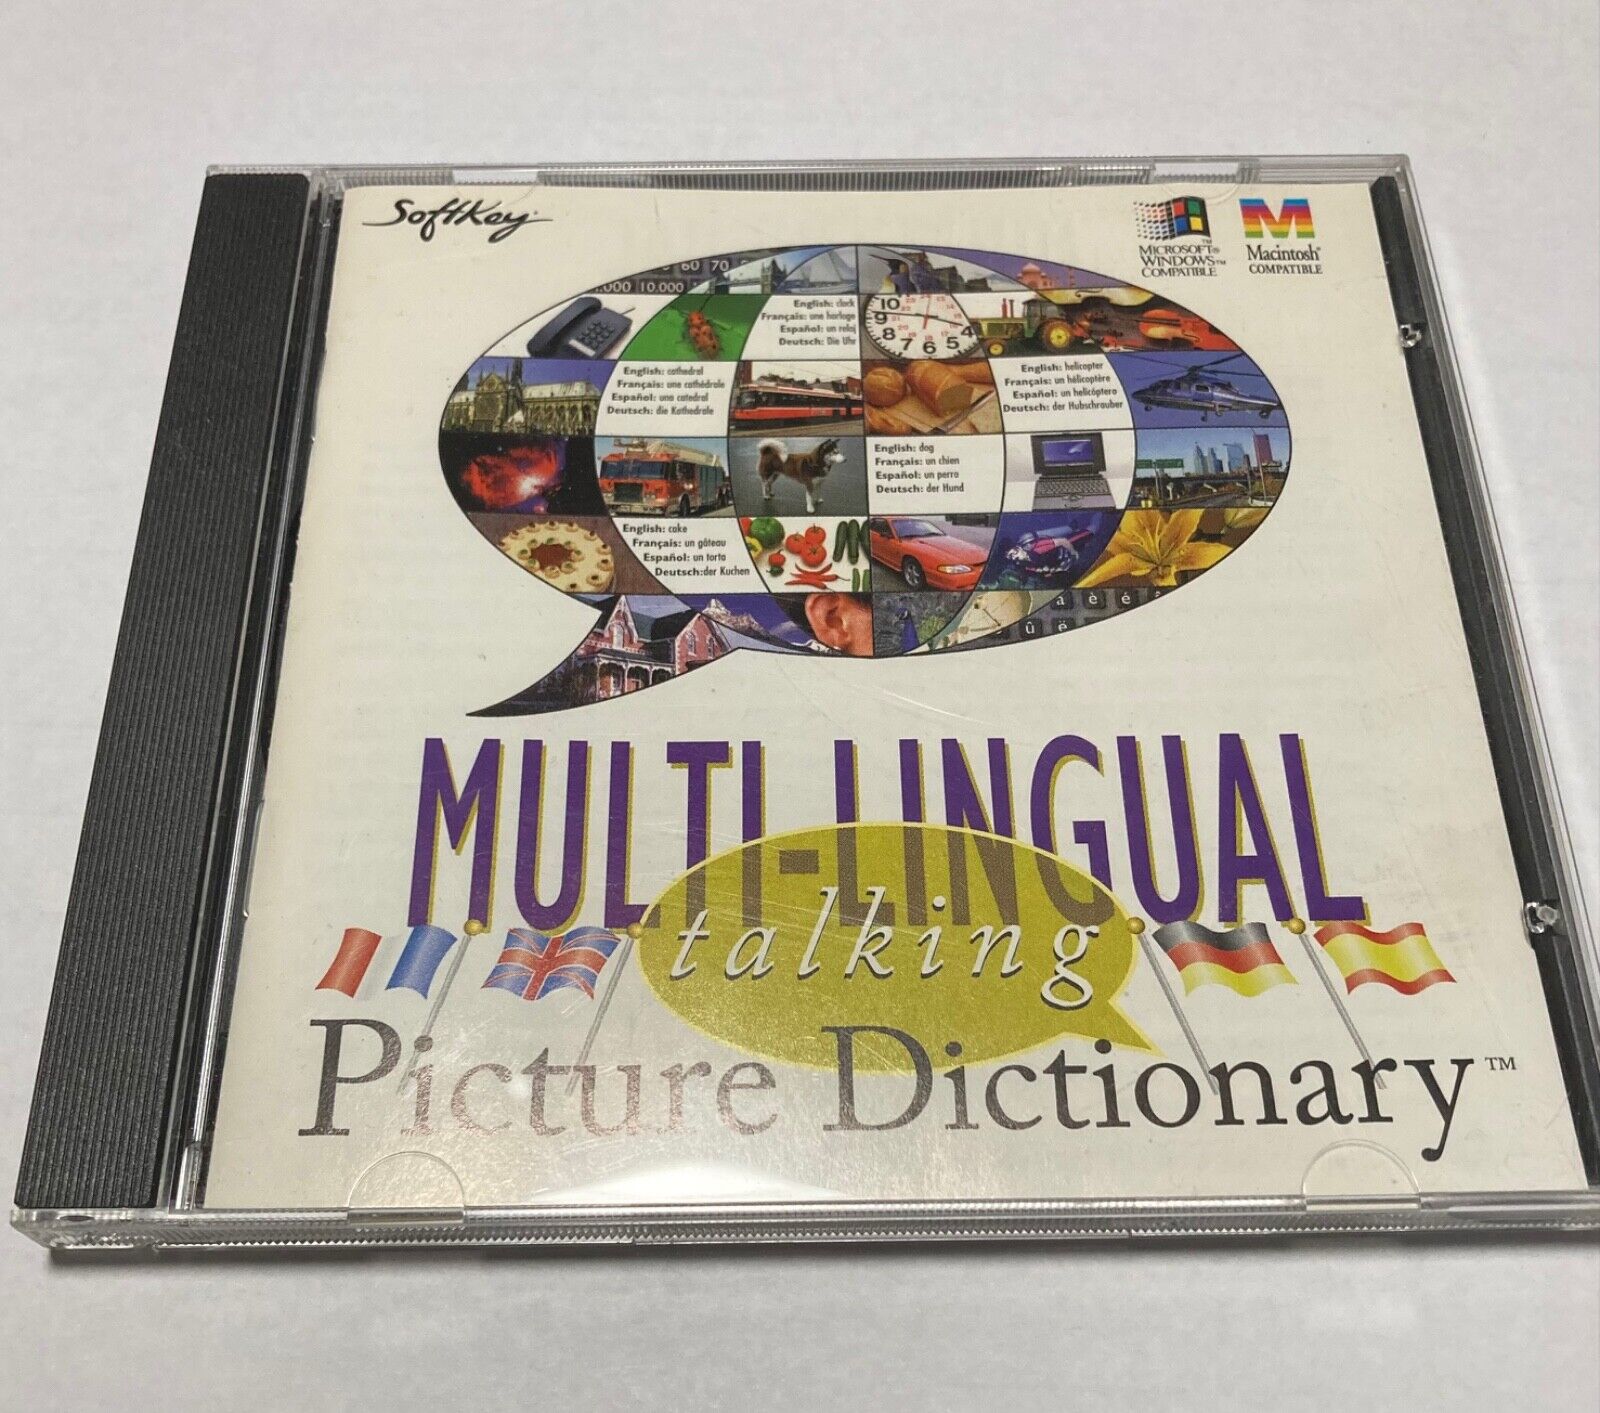 Multi-lingual talking picture dictionary CD-ROM for Windows and MacIntosh